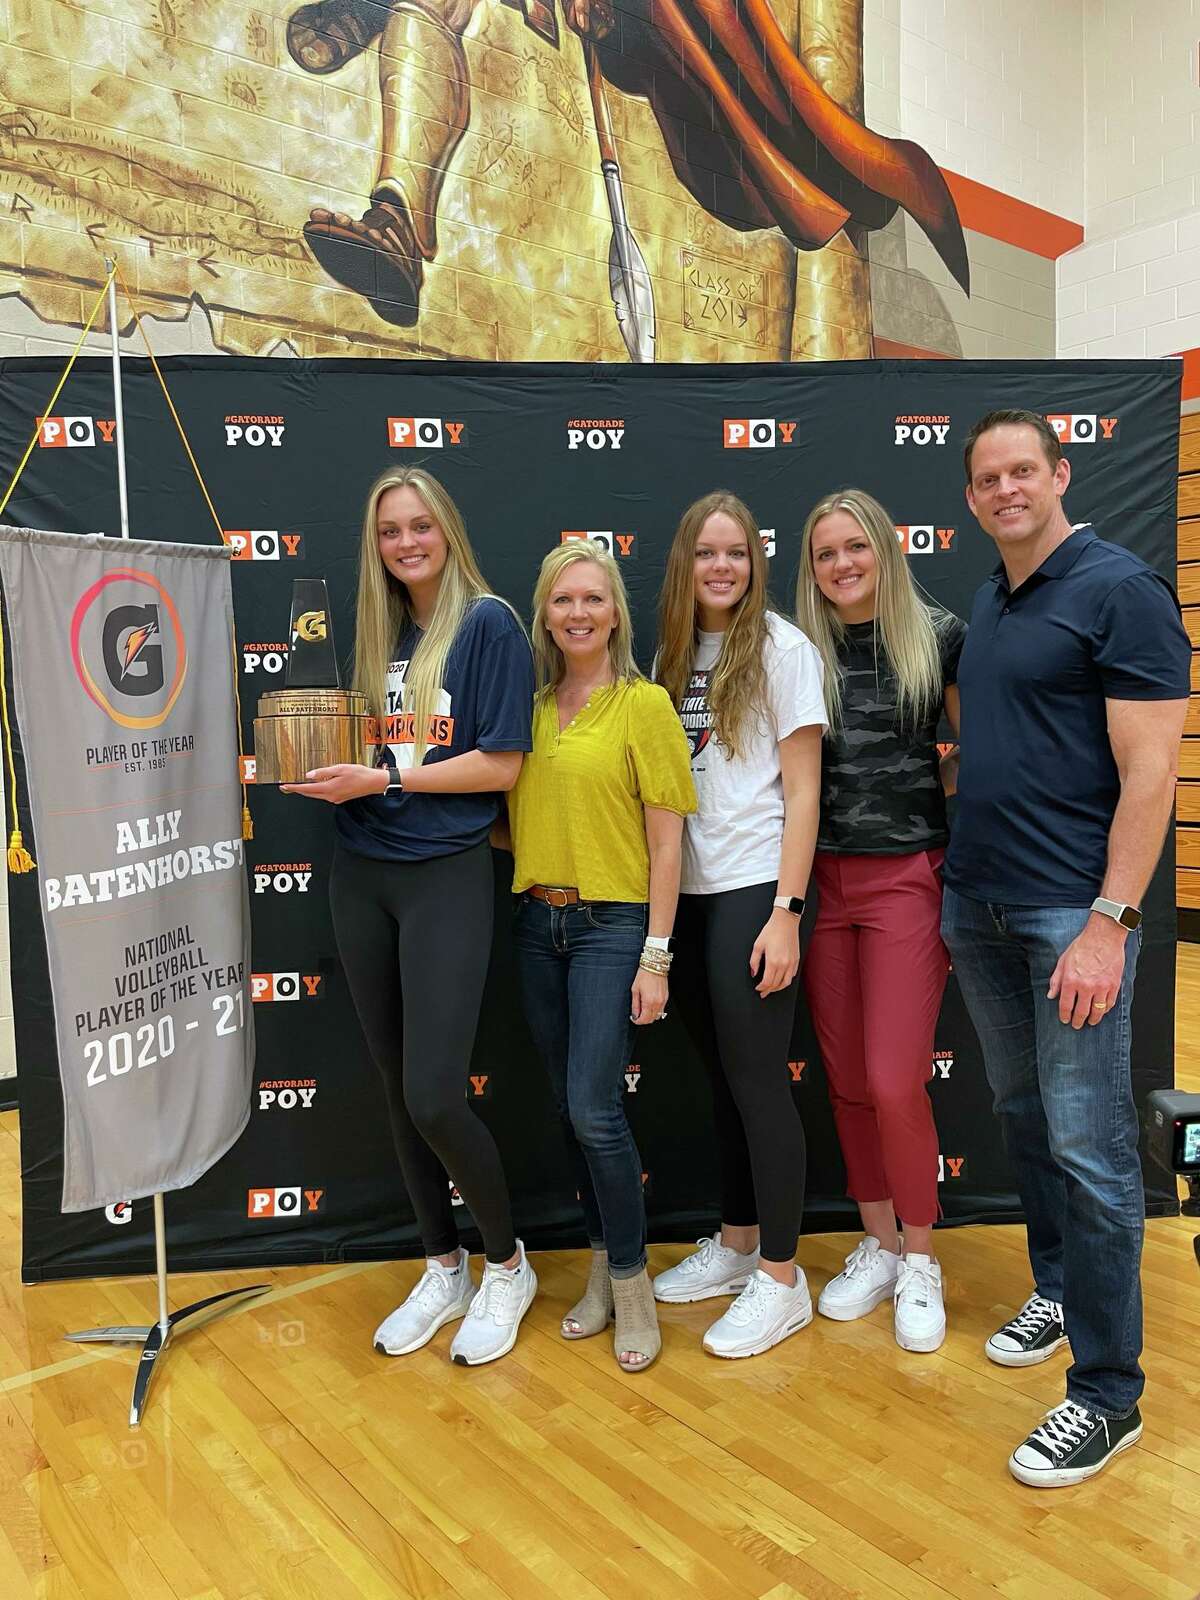 Seven Lakes' Ally Batenhorst was honored as the Gatorade National Volleyball Player of the Year during a May 12 ceremony with family, friends, teammates, coaches and staff at Seven Lakes High School.